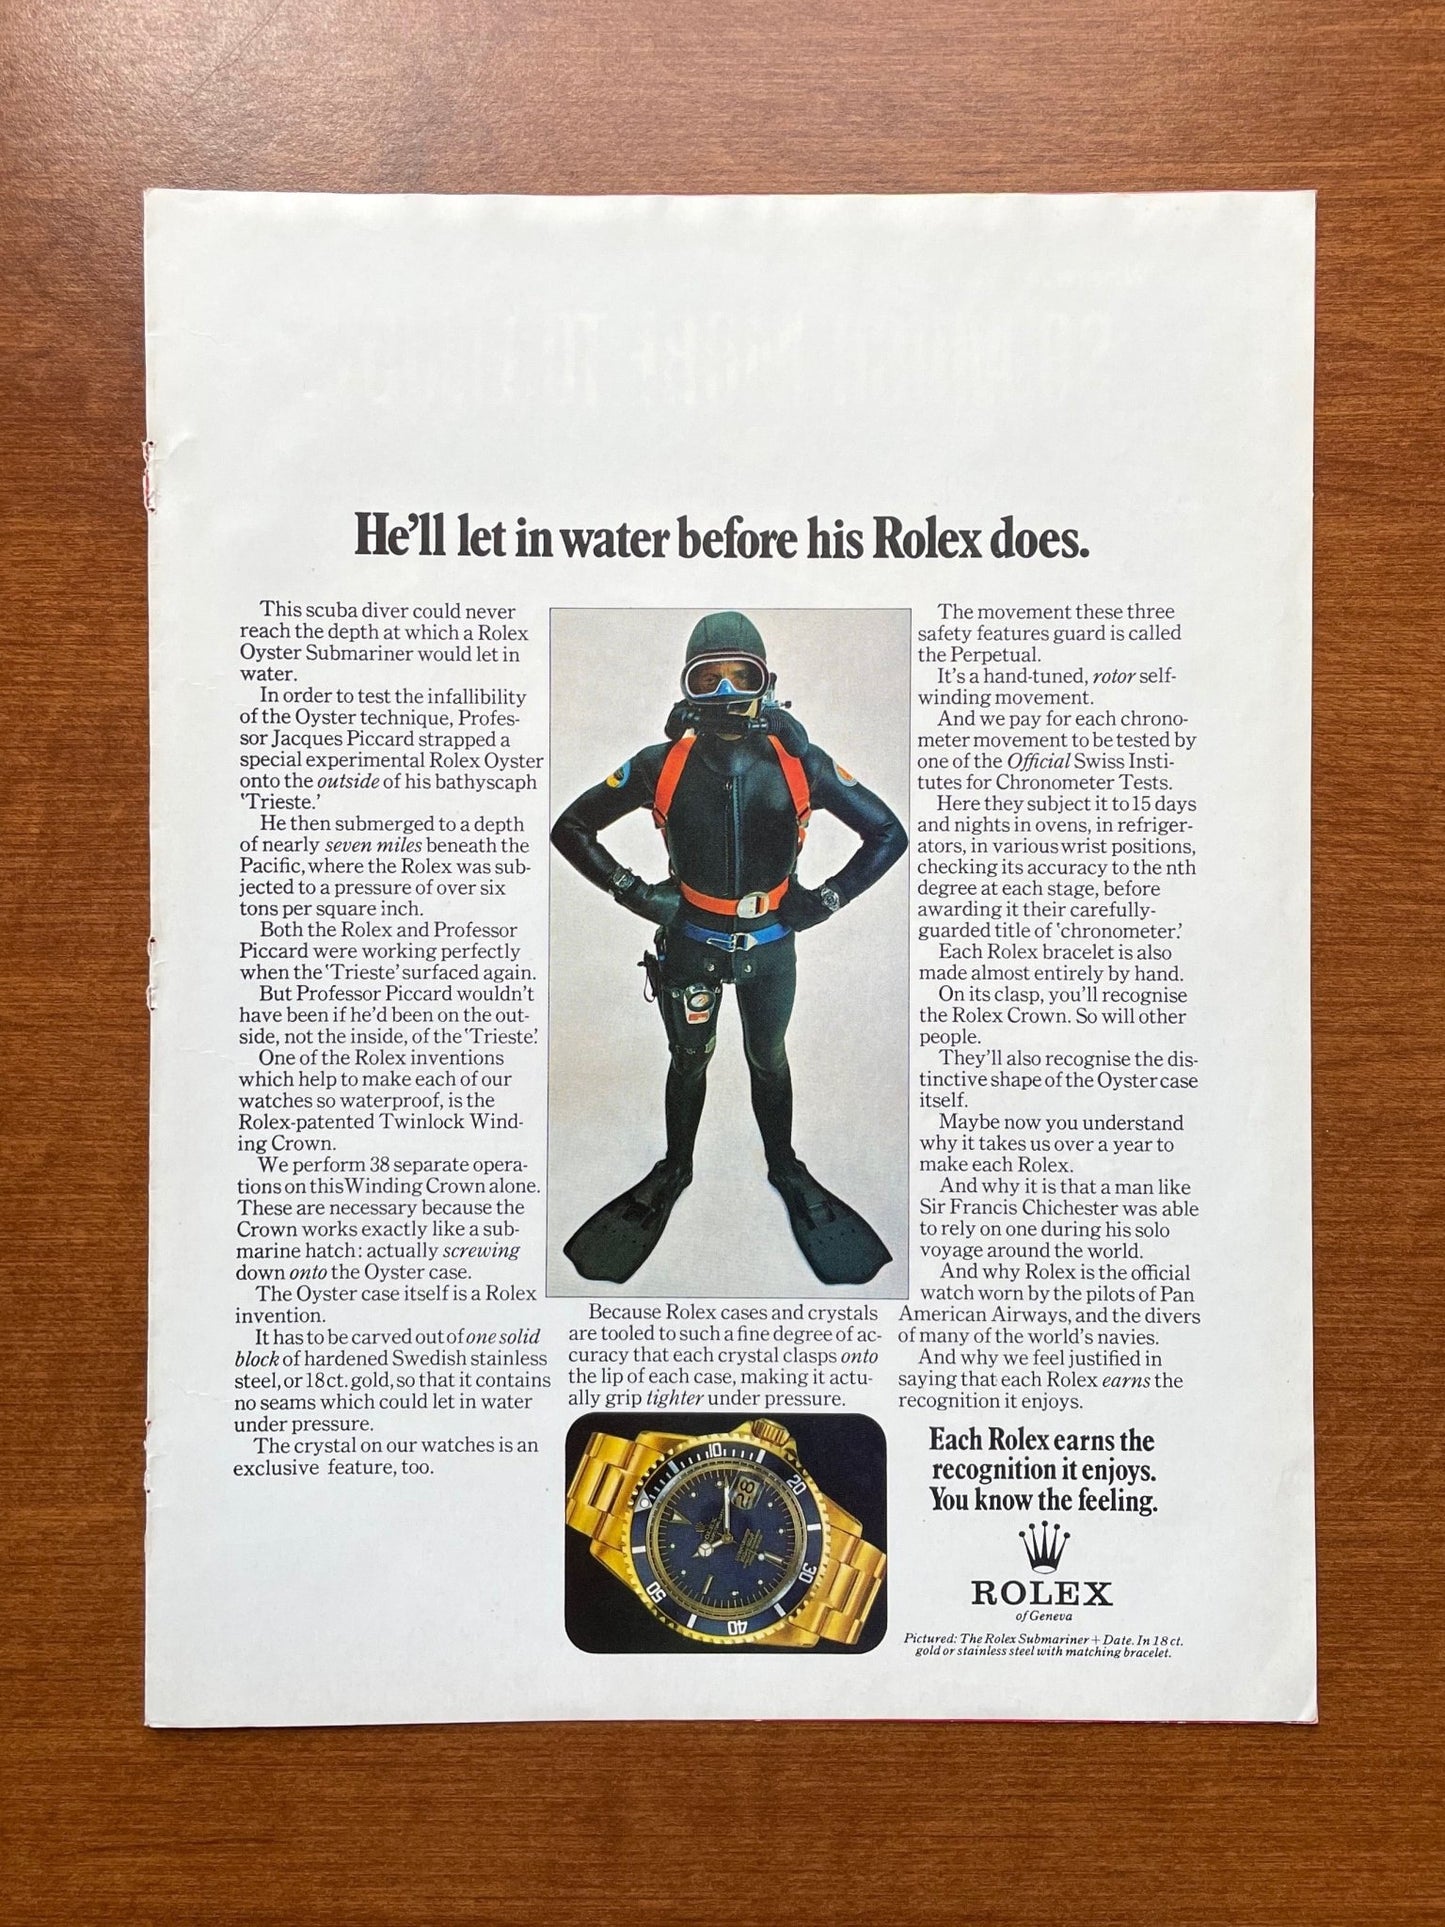 1970 Rolex Submariner Ref. 1680 "He'll let in water..." Advertisement